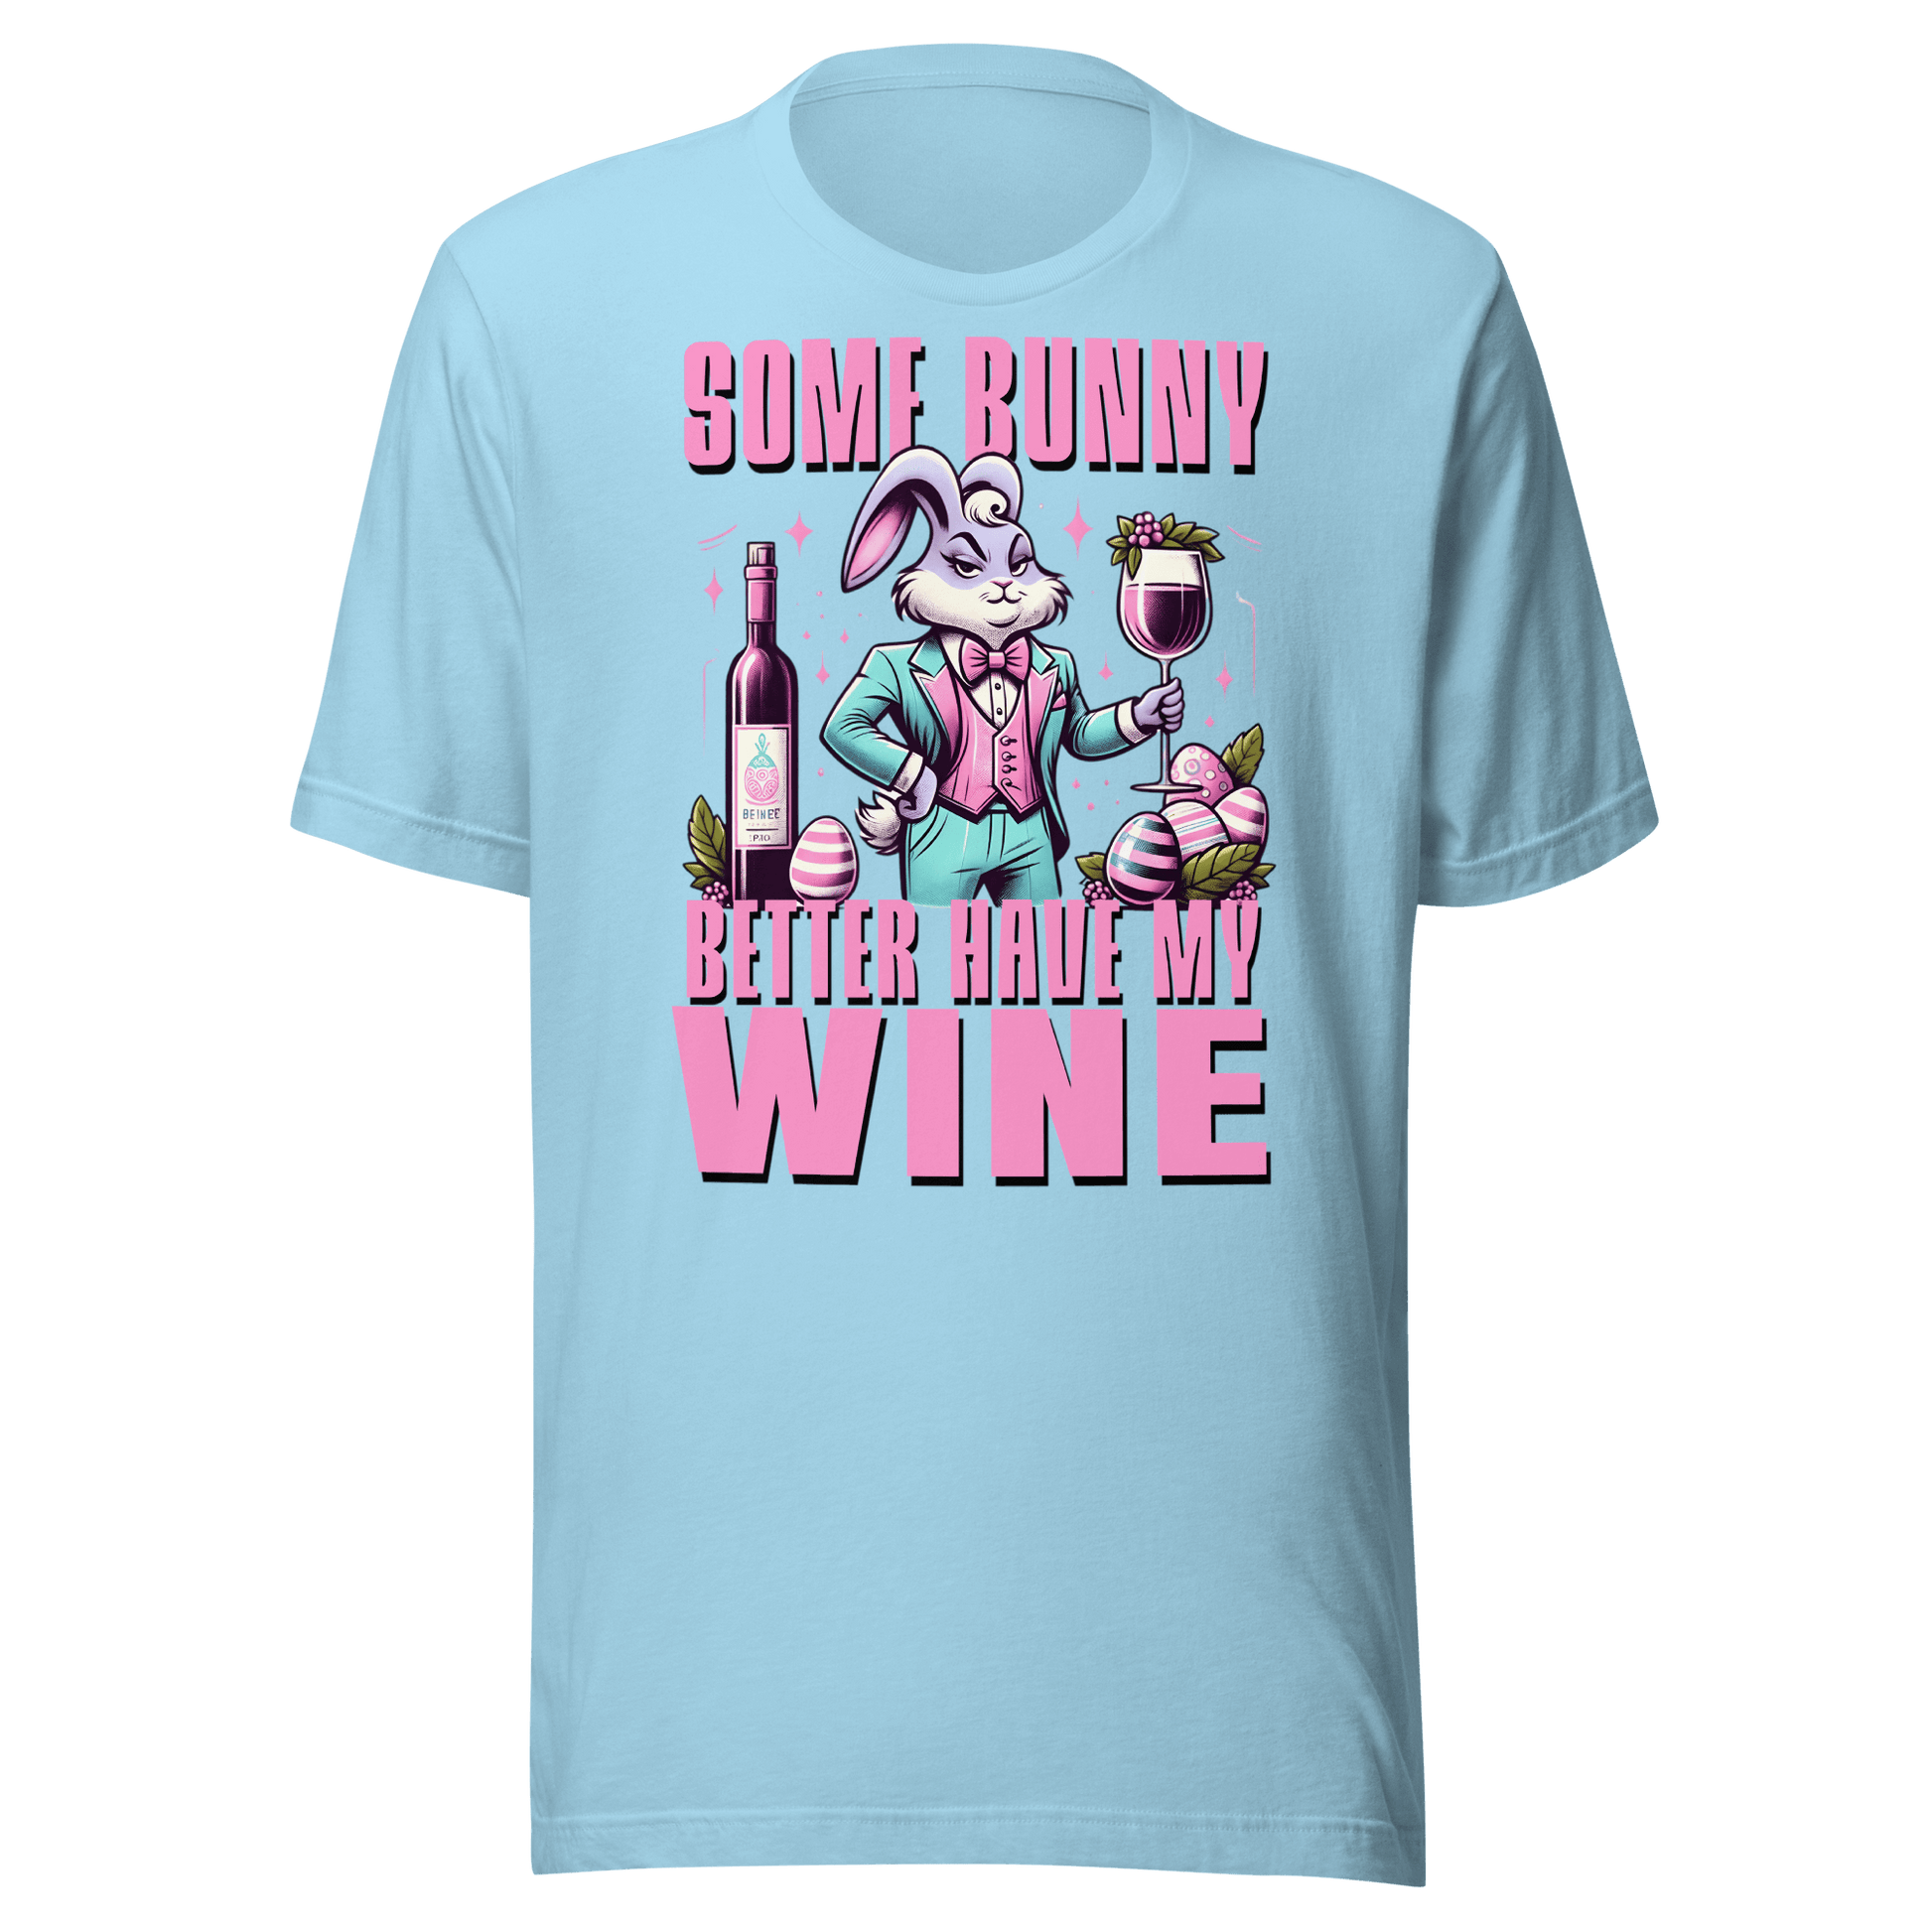 Some Bunny Better Have My Wine Tee